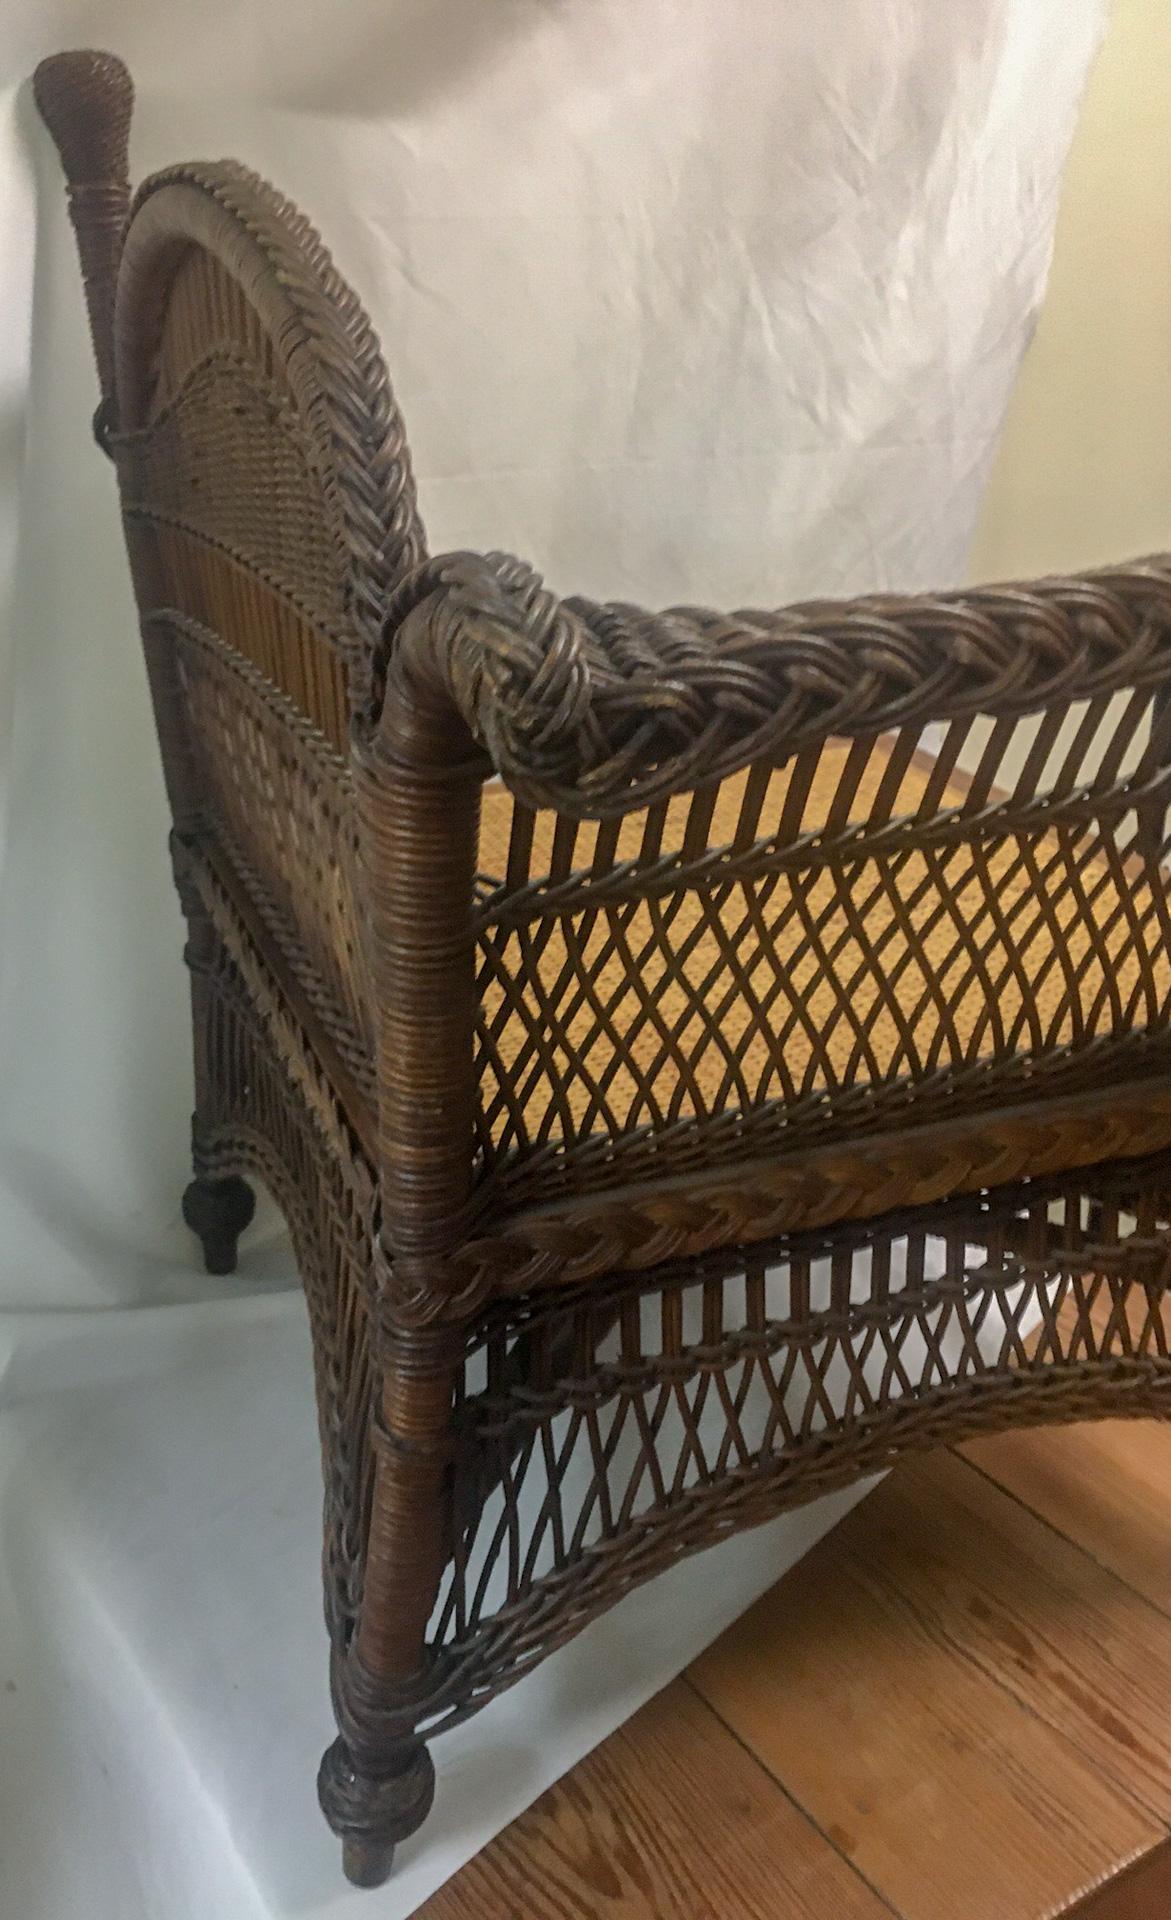 Antique Wicker Heywood Wakefield Corner or Photographer's Chair In Good Condition For Sale In Savannah, GA